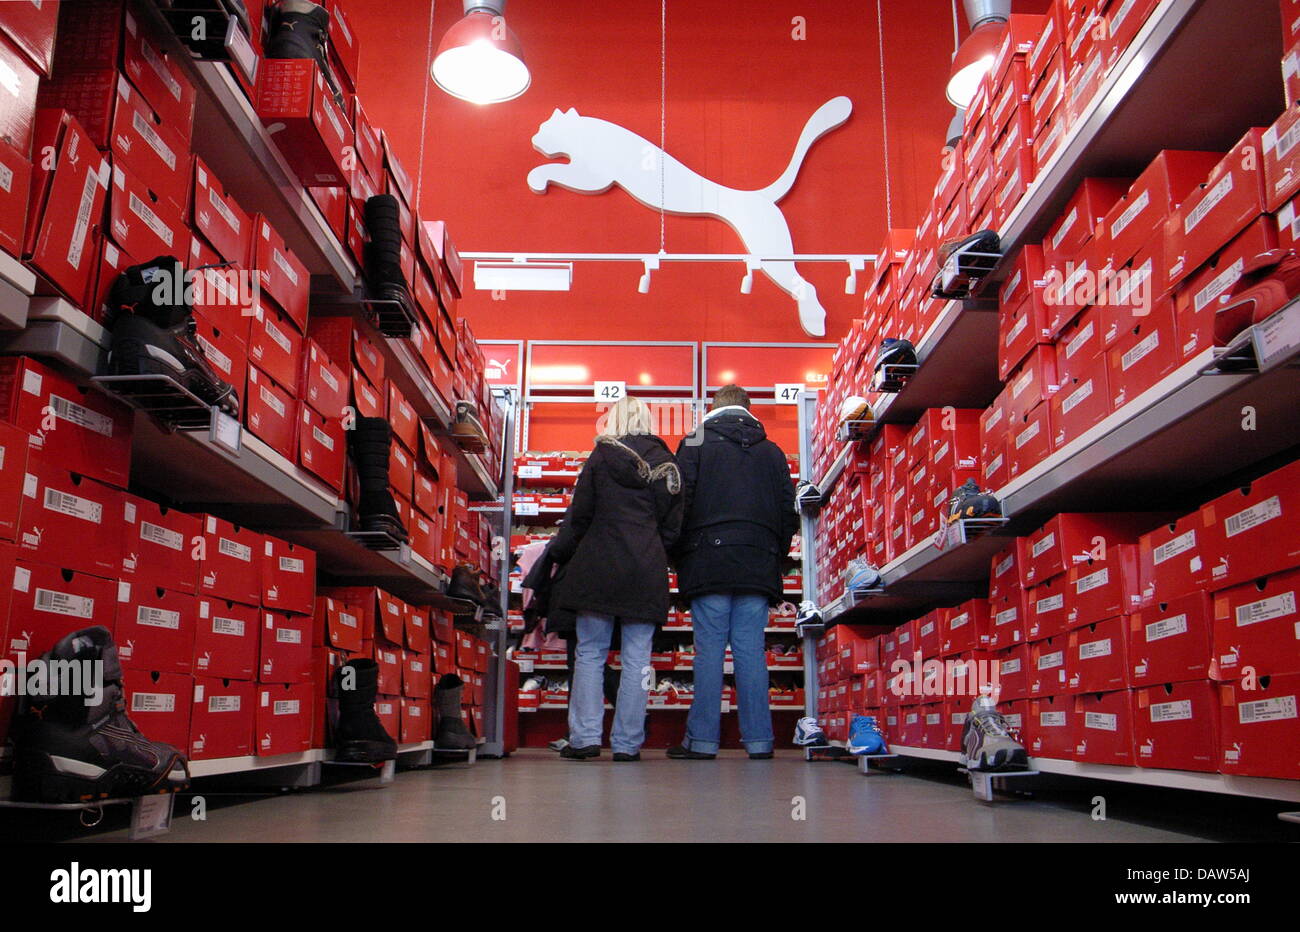 puma shoes outlet store Sale,up to 44 